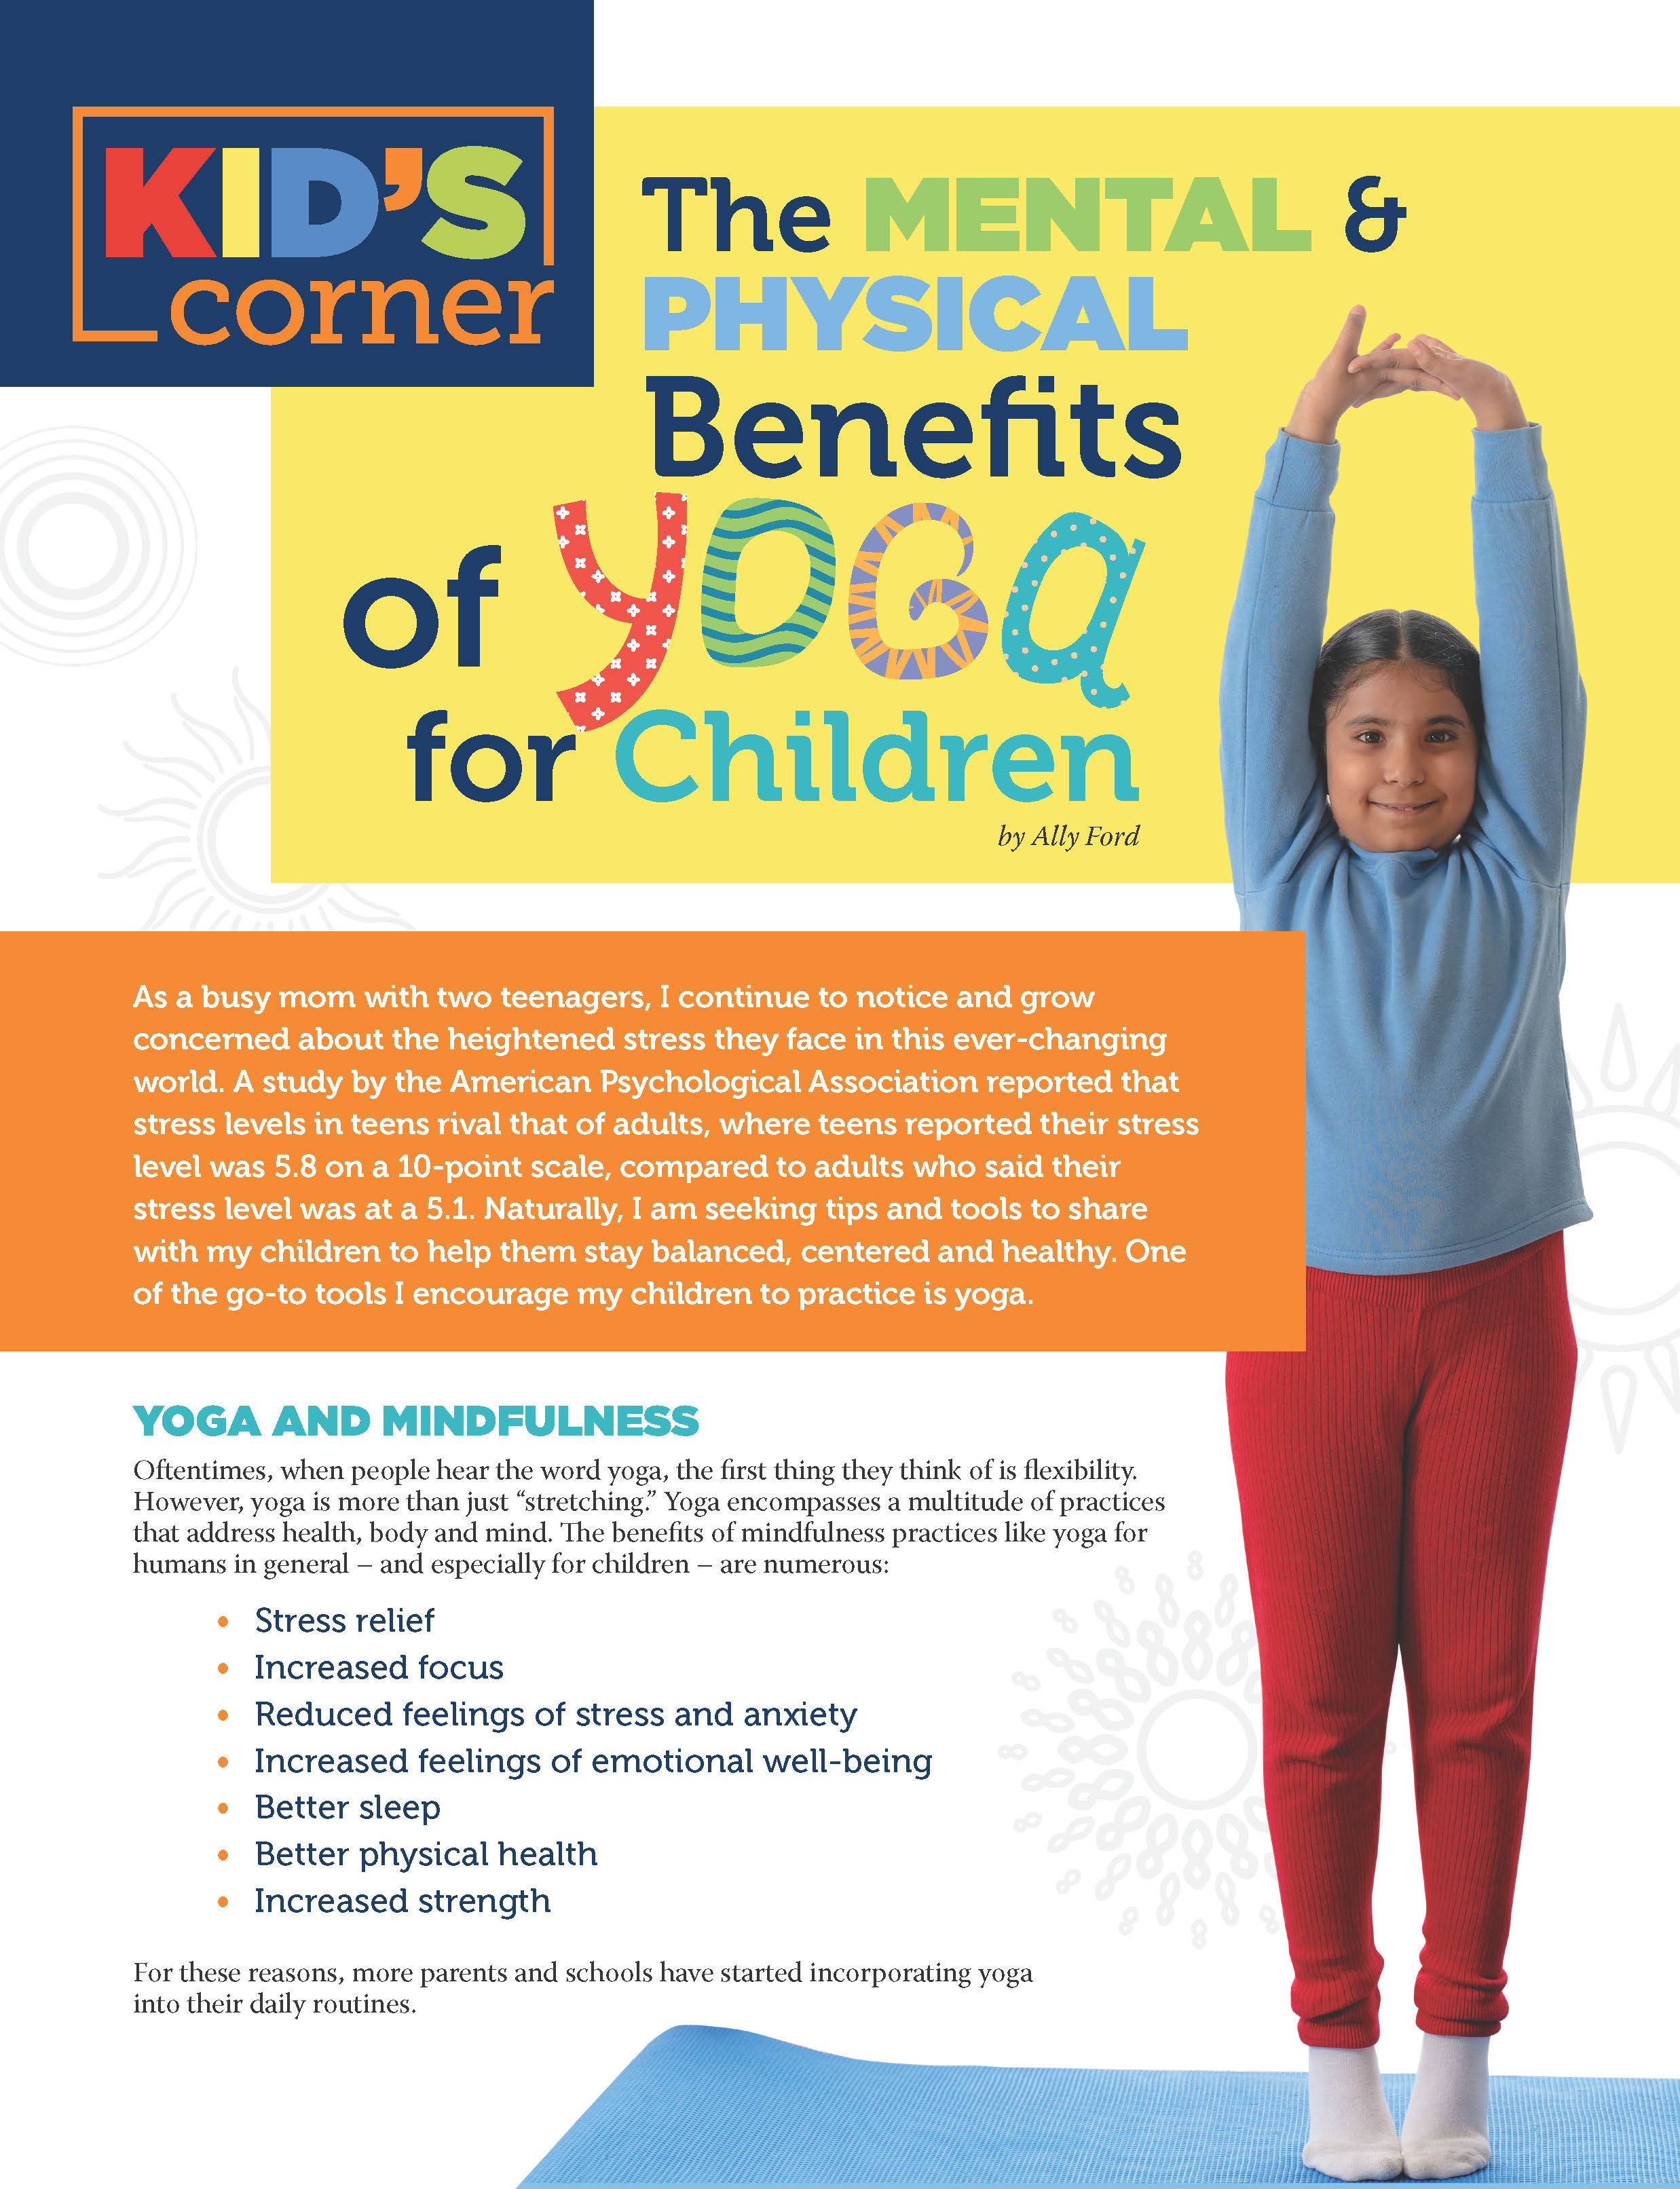 Therapeutic Benefits of Yoga for Kids